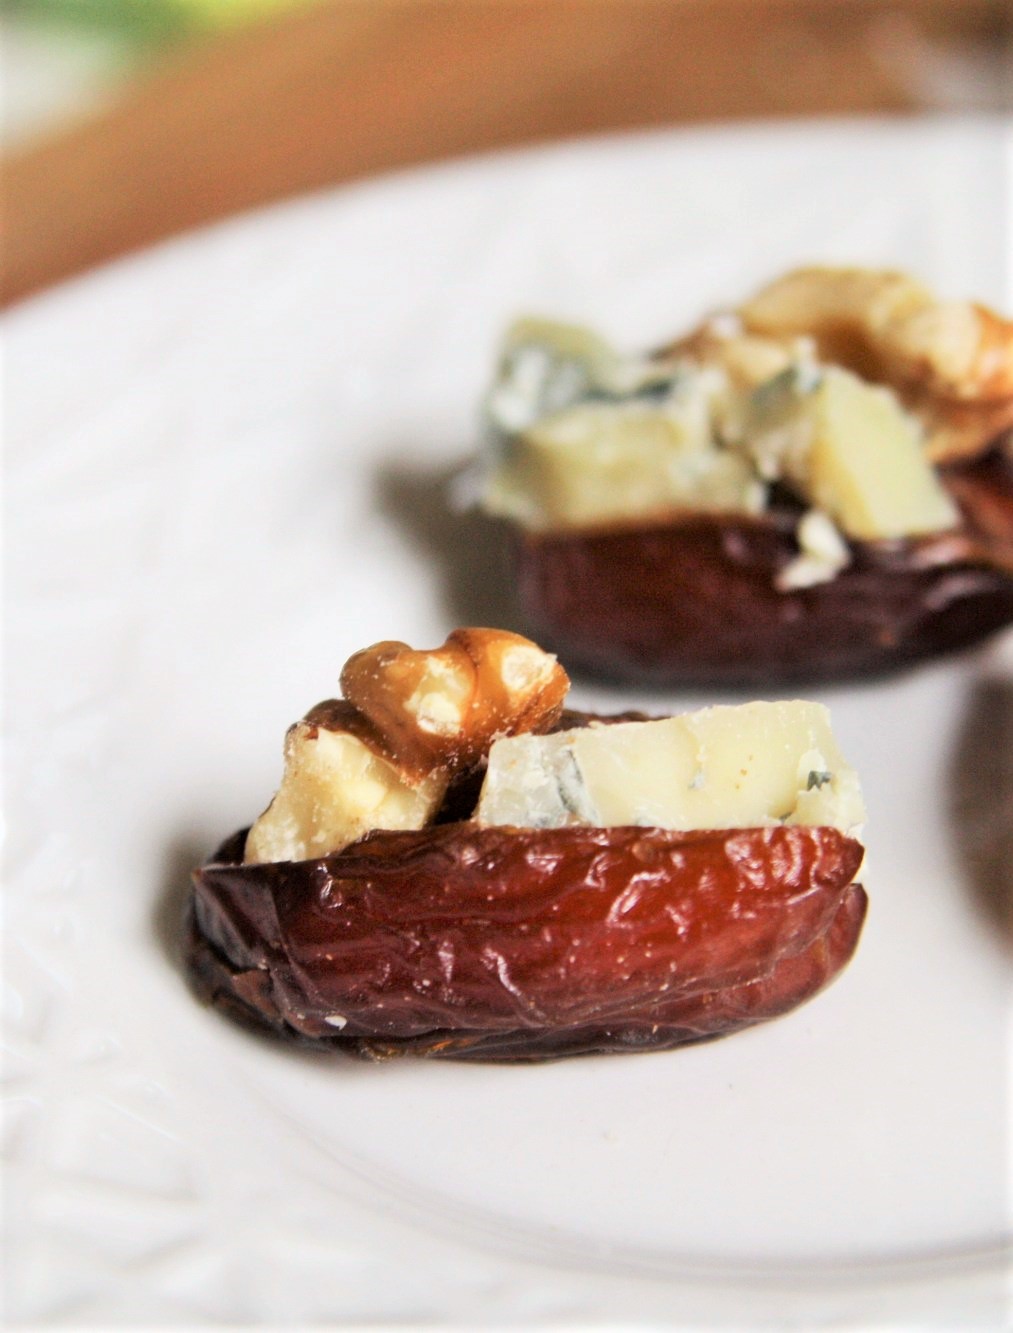 These Blue Cheese and Walnut Stuffed Dates are one those effortless appetizers that never fail to impress - simple, elegant, and the perfect combination of sweet and savory flavors!